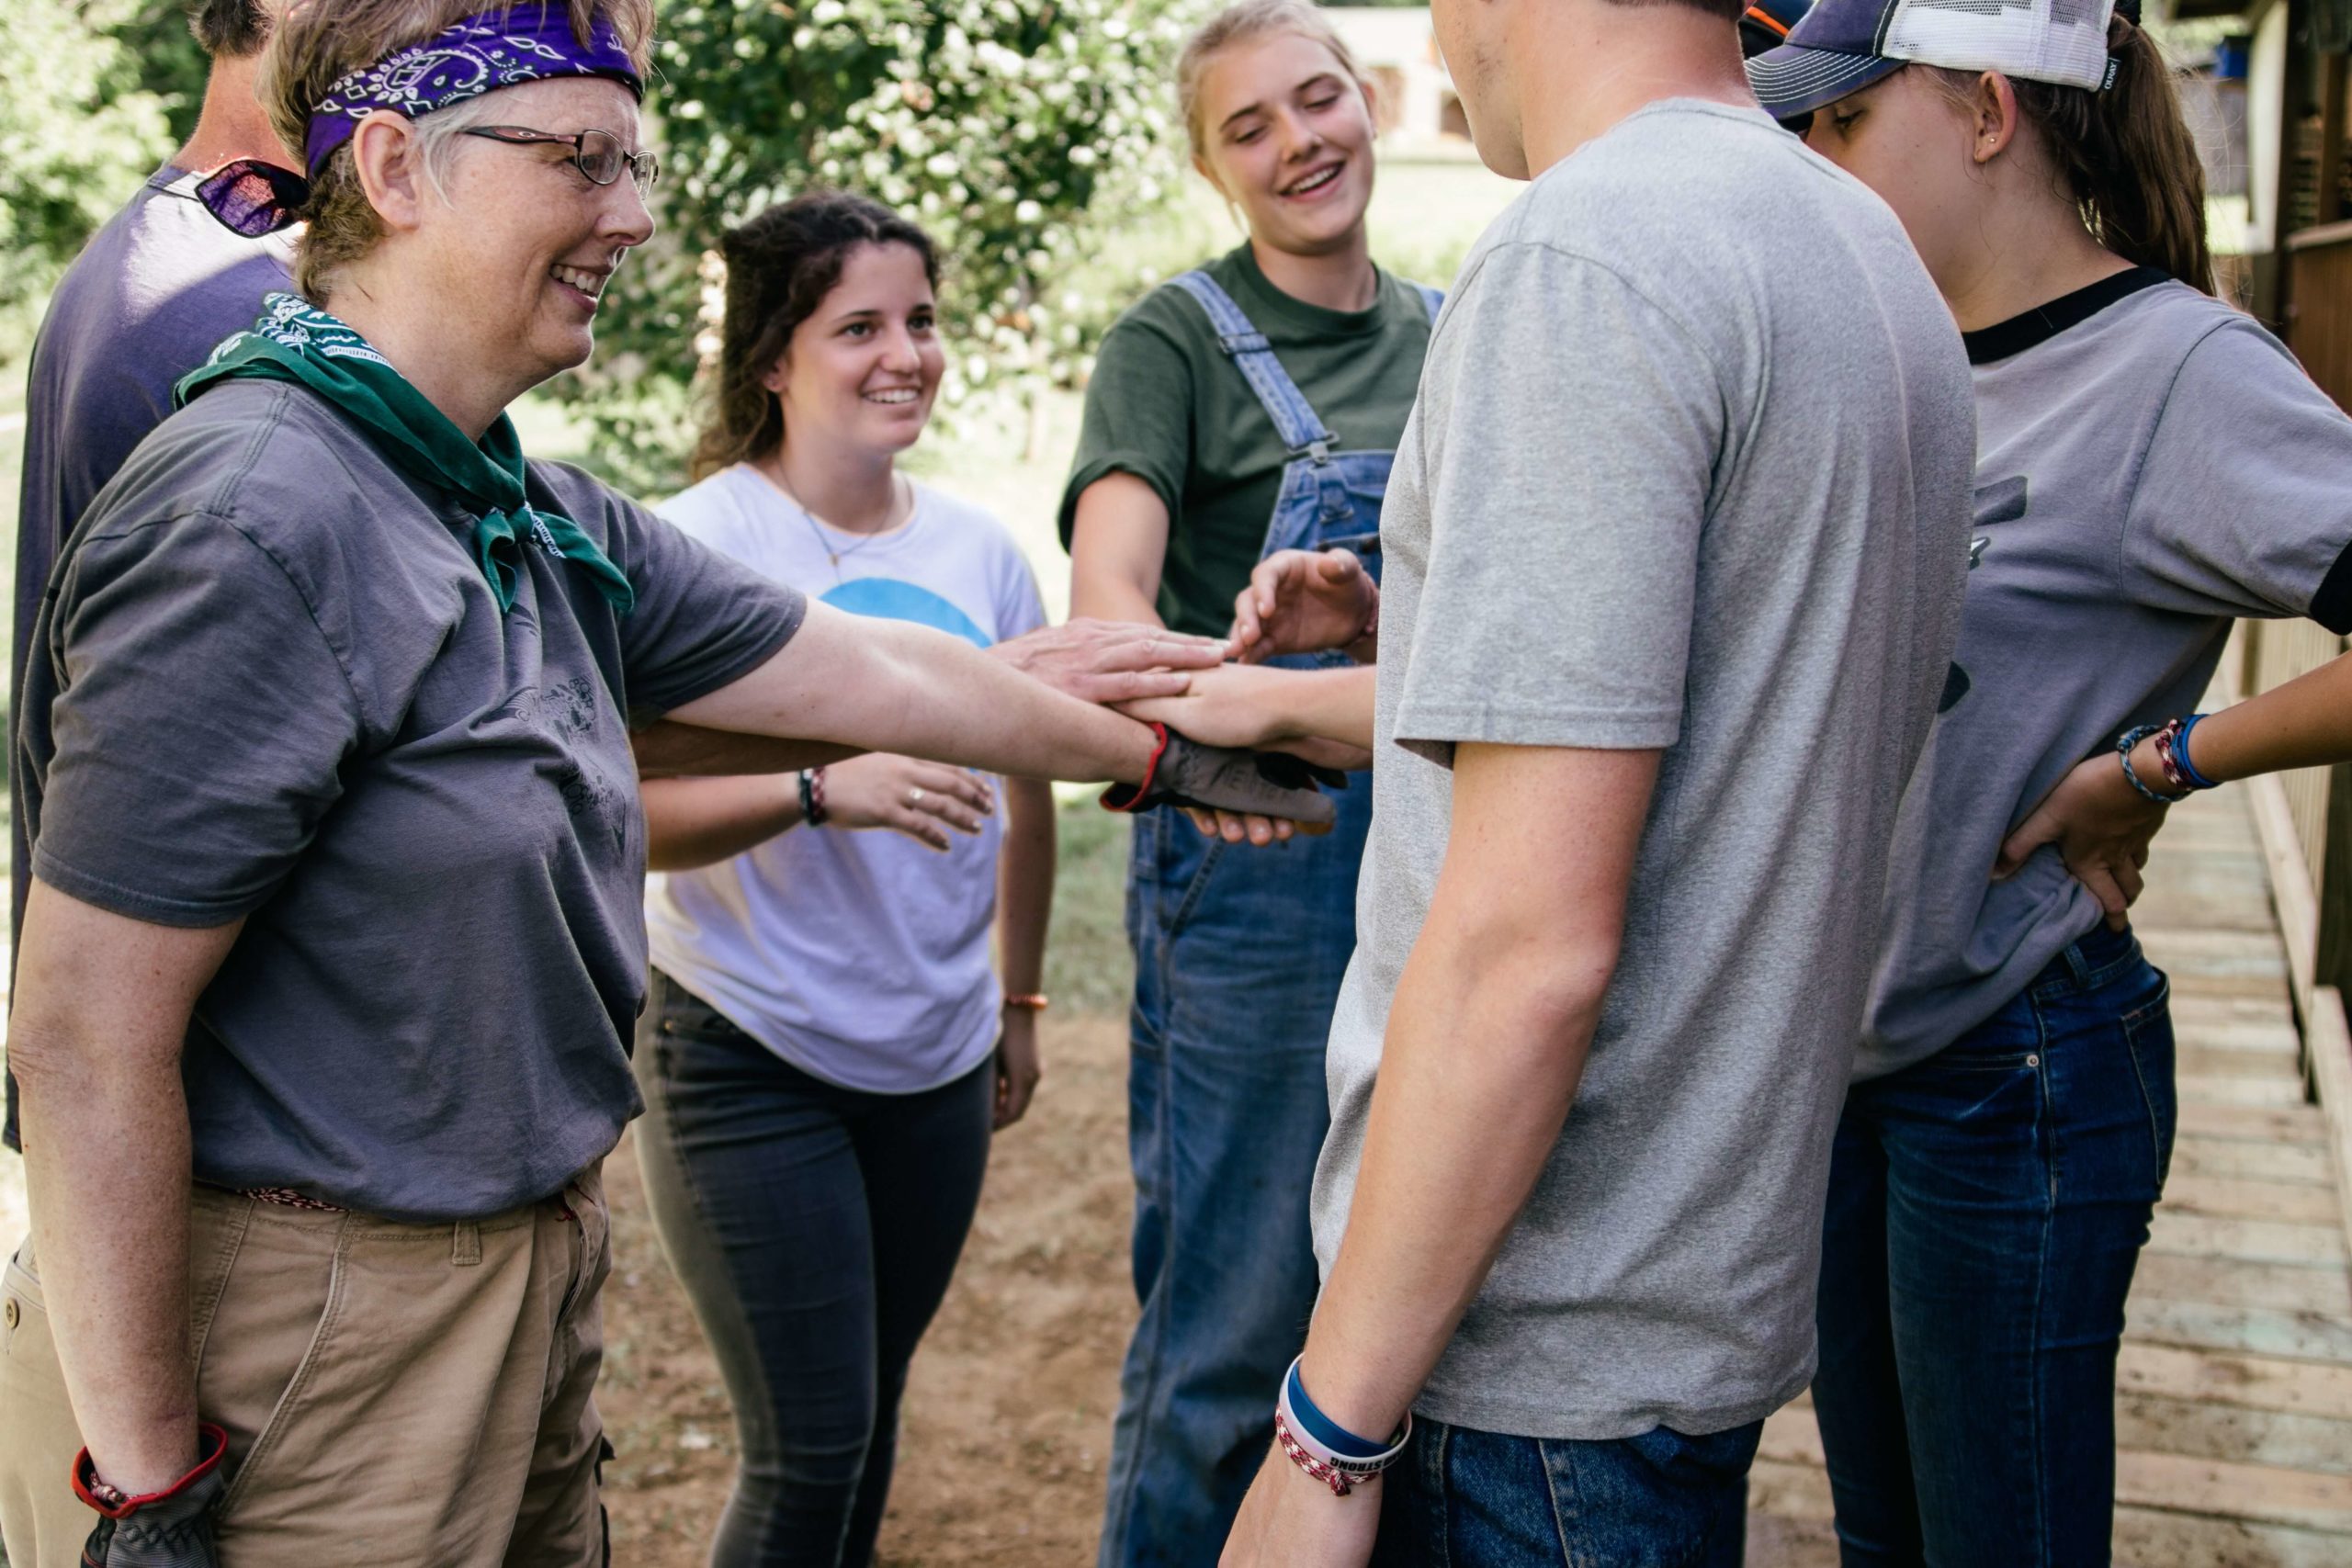 Nuts & Bolts: 7 Ways Love Can Guide ASP Group Leaders